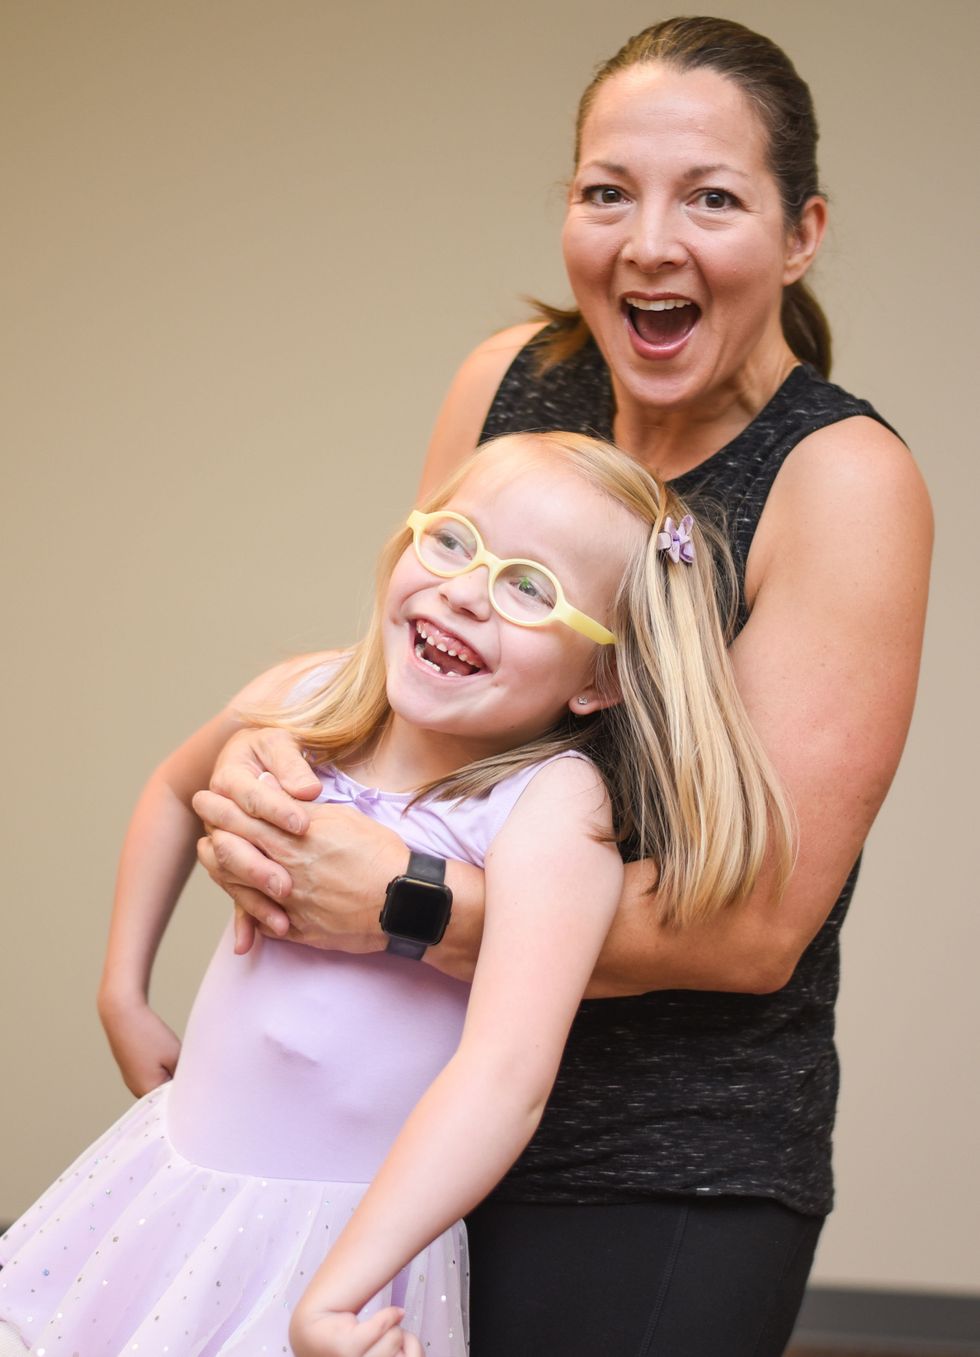 Kim Black grins at the camera, holding on to a young girl in a sparkly purple dress and yellow glasses who is also grinning